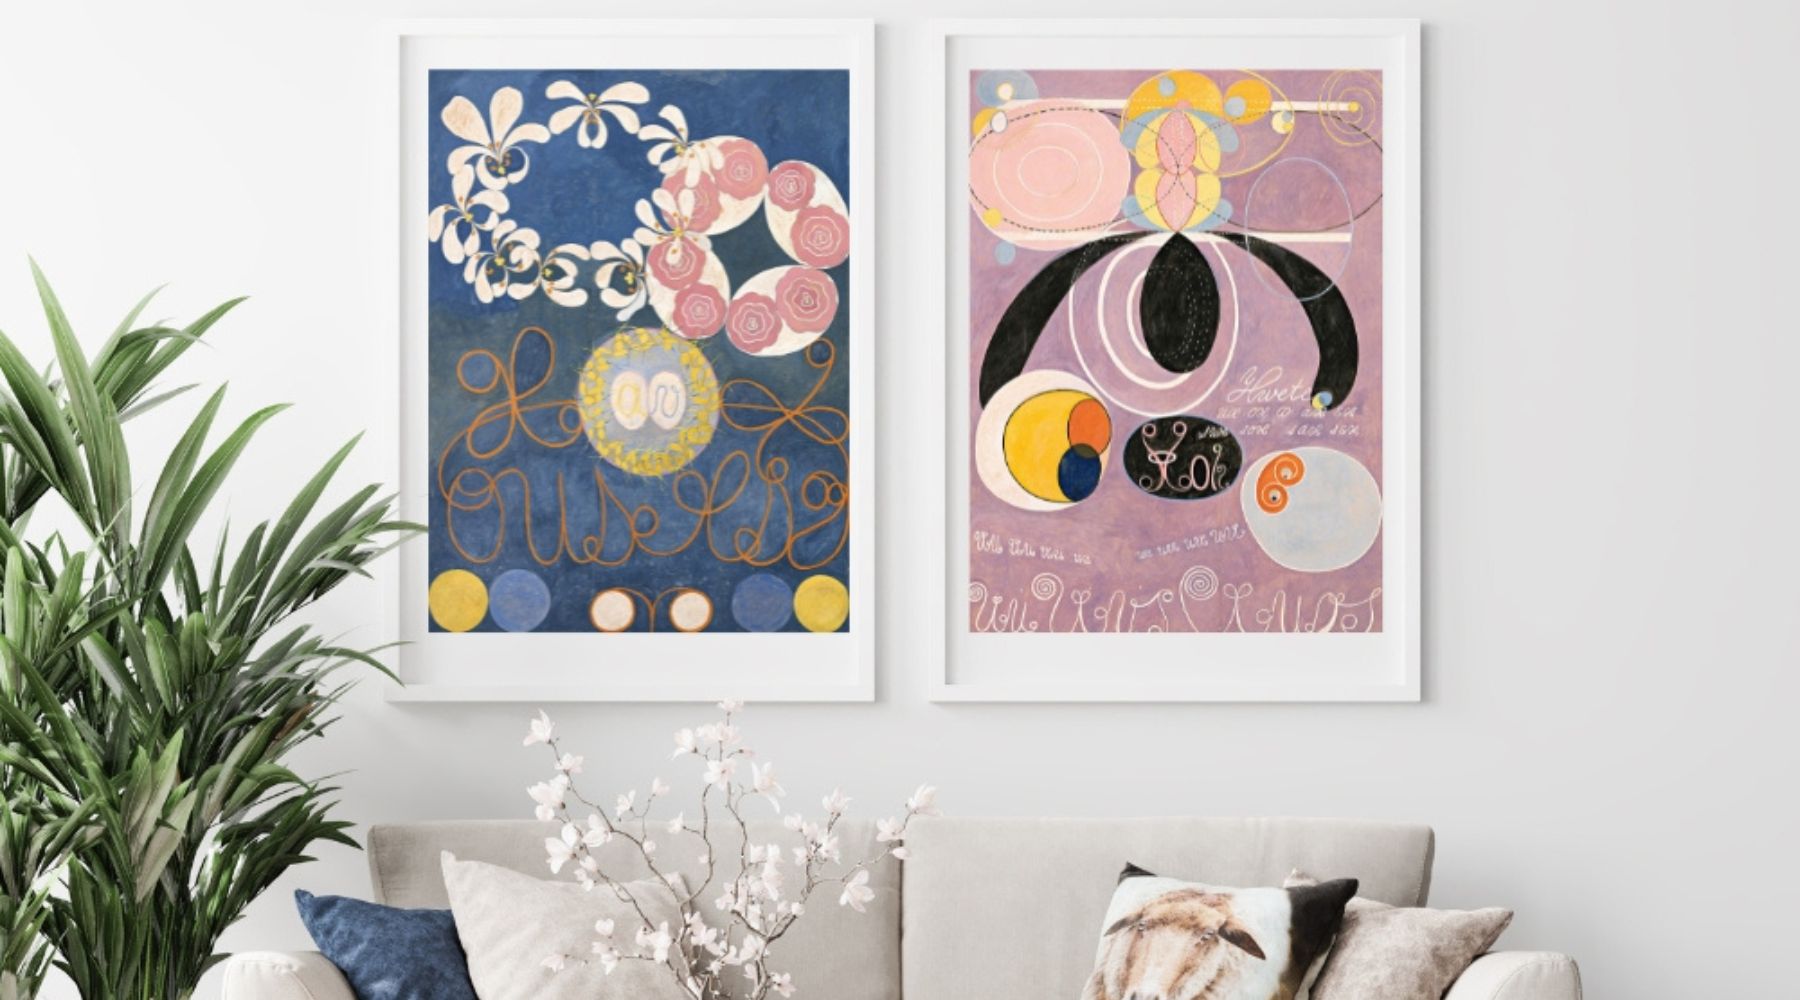 Vintage Art Prints Will Add Quirky Fun to Any Space - sofunshop